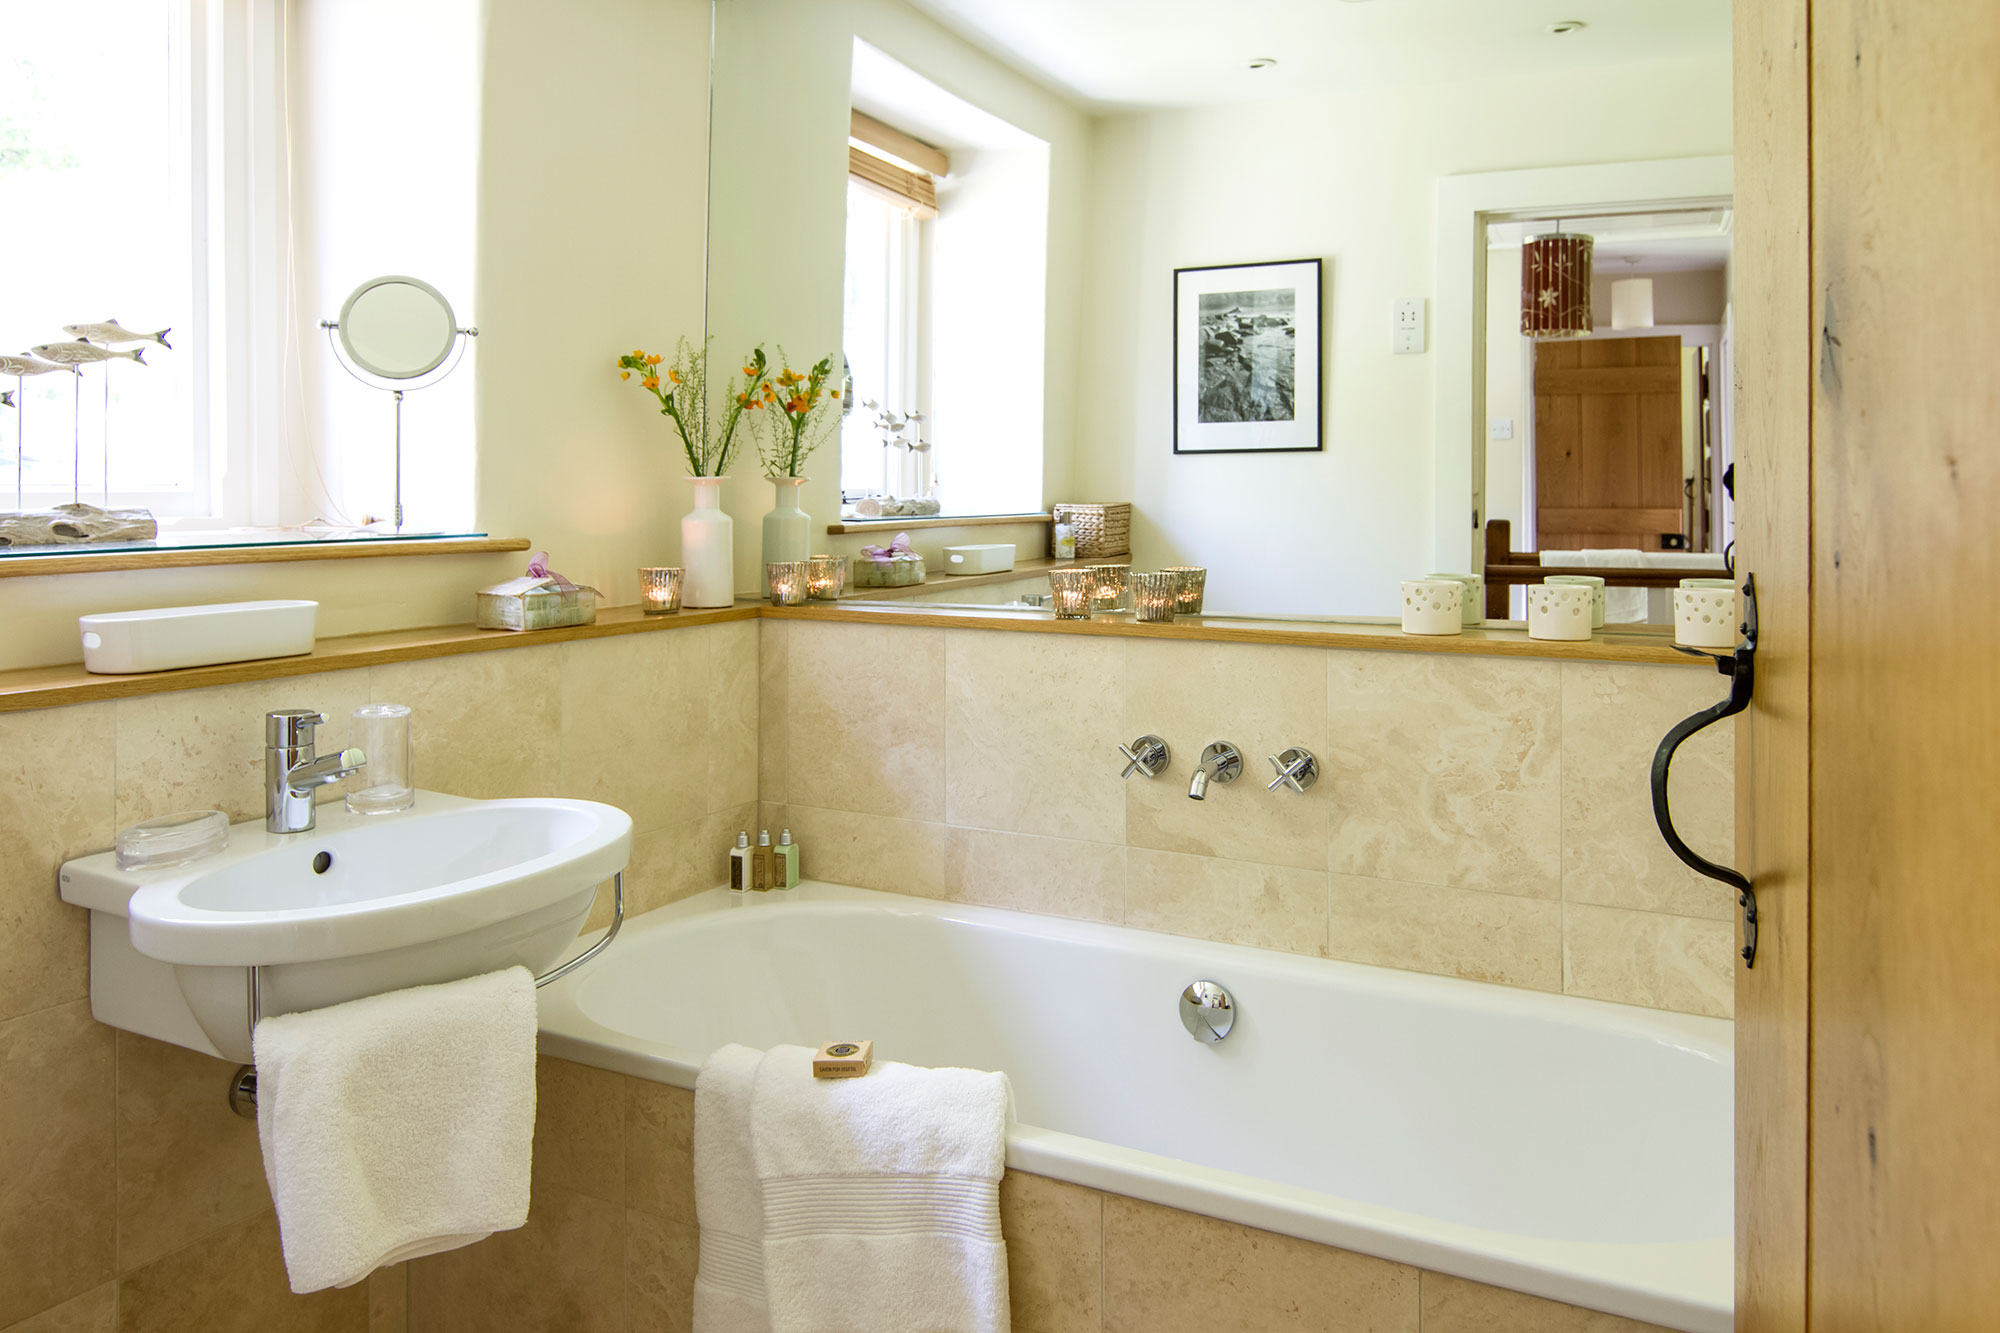 property photographer lake district professional photographer cumbria interior photography lucy barden